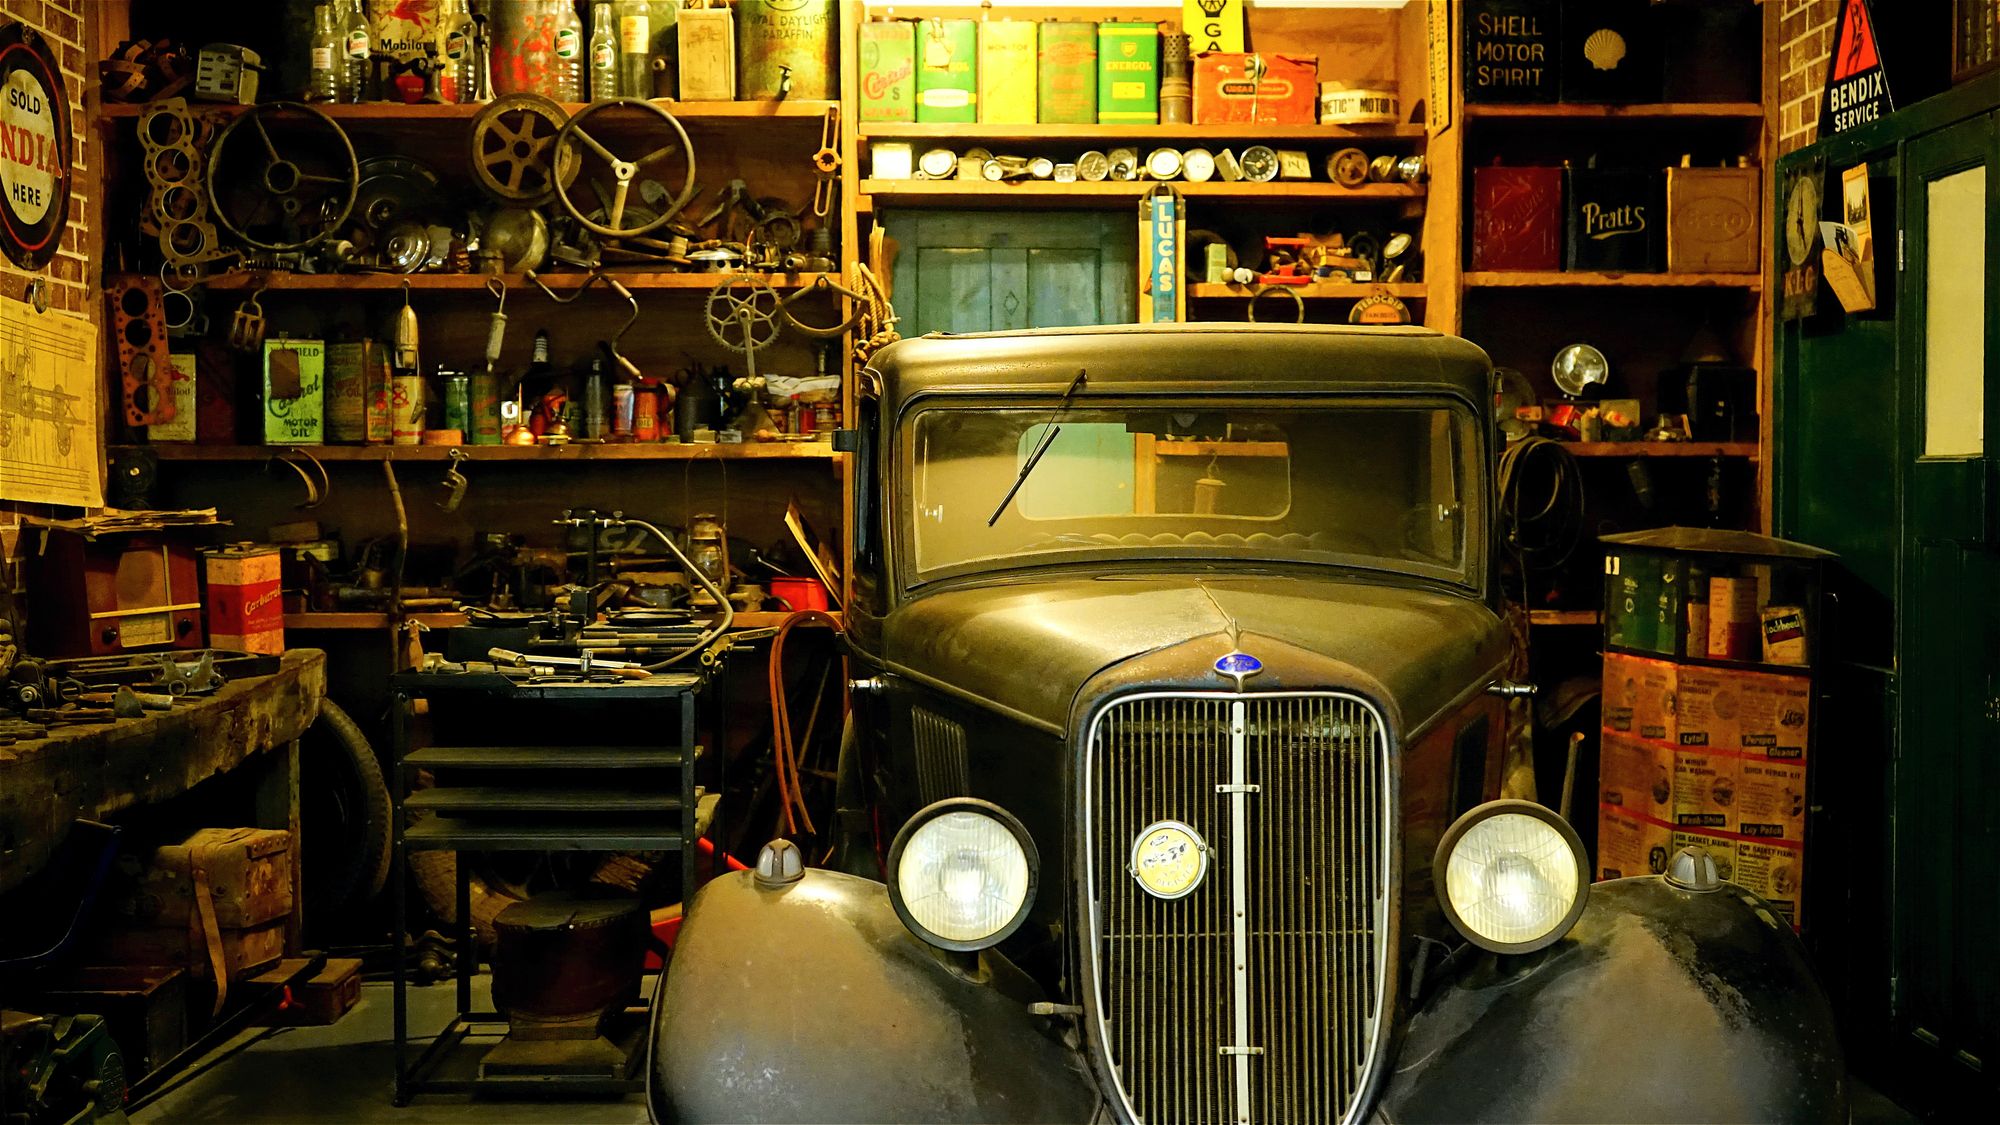 An old garage with a vintage car and auto supplies.